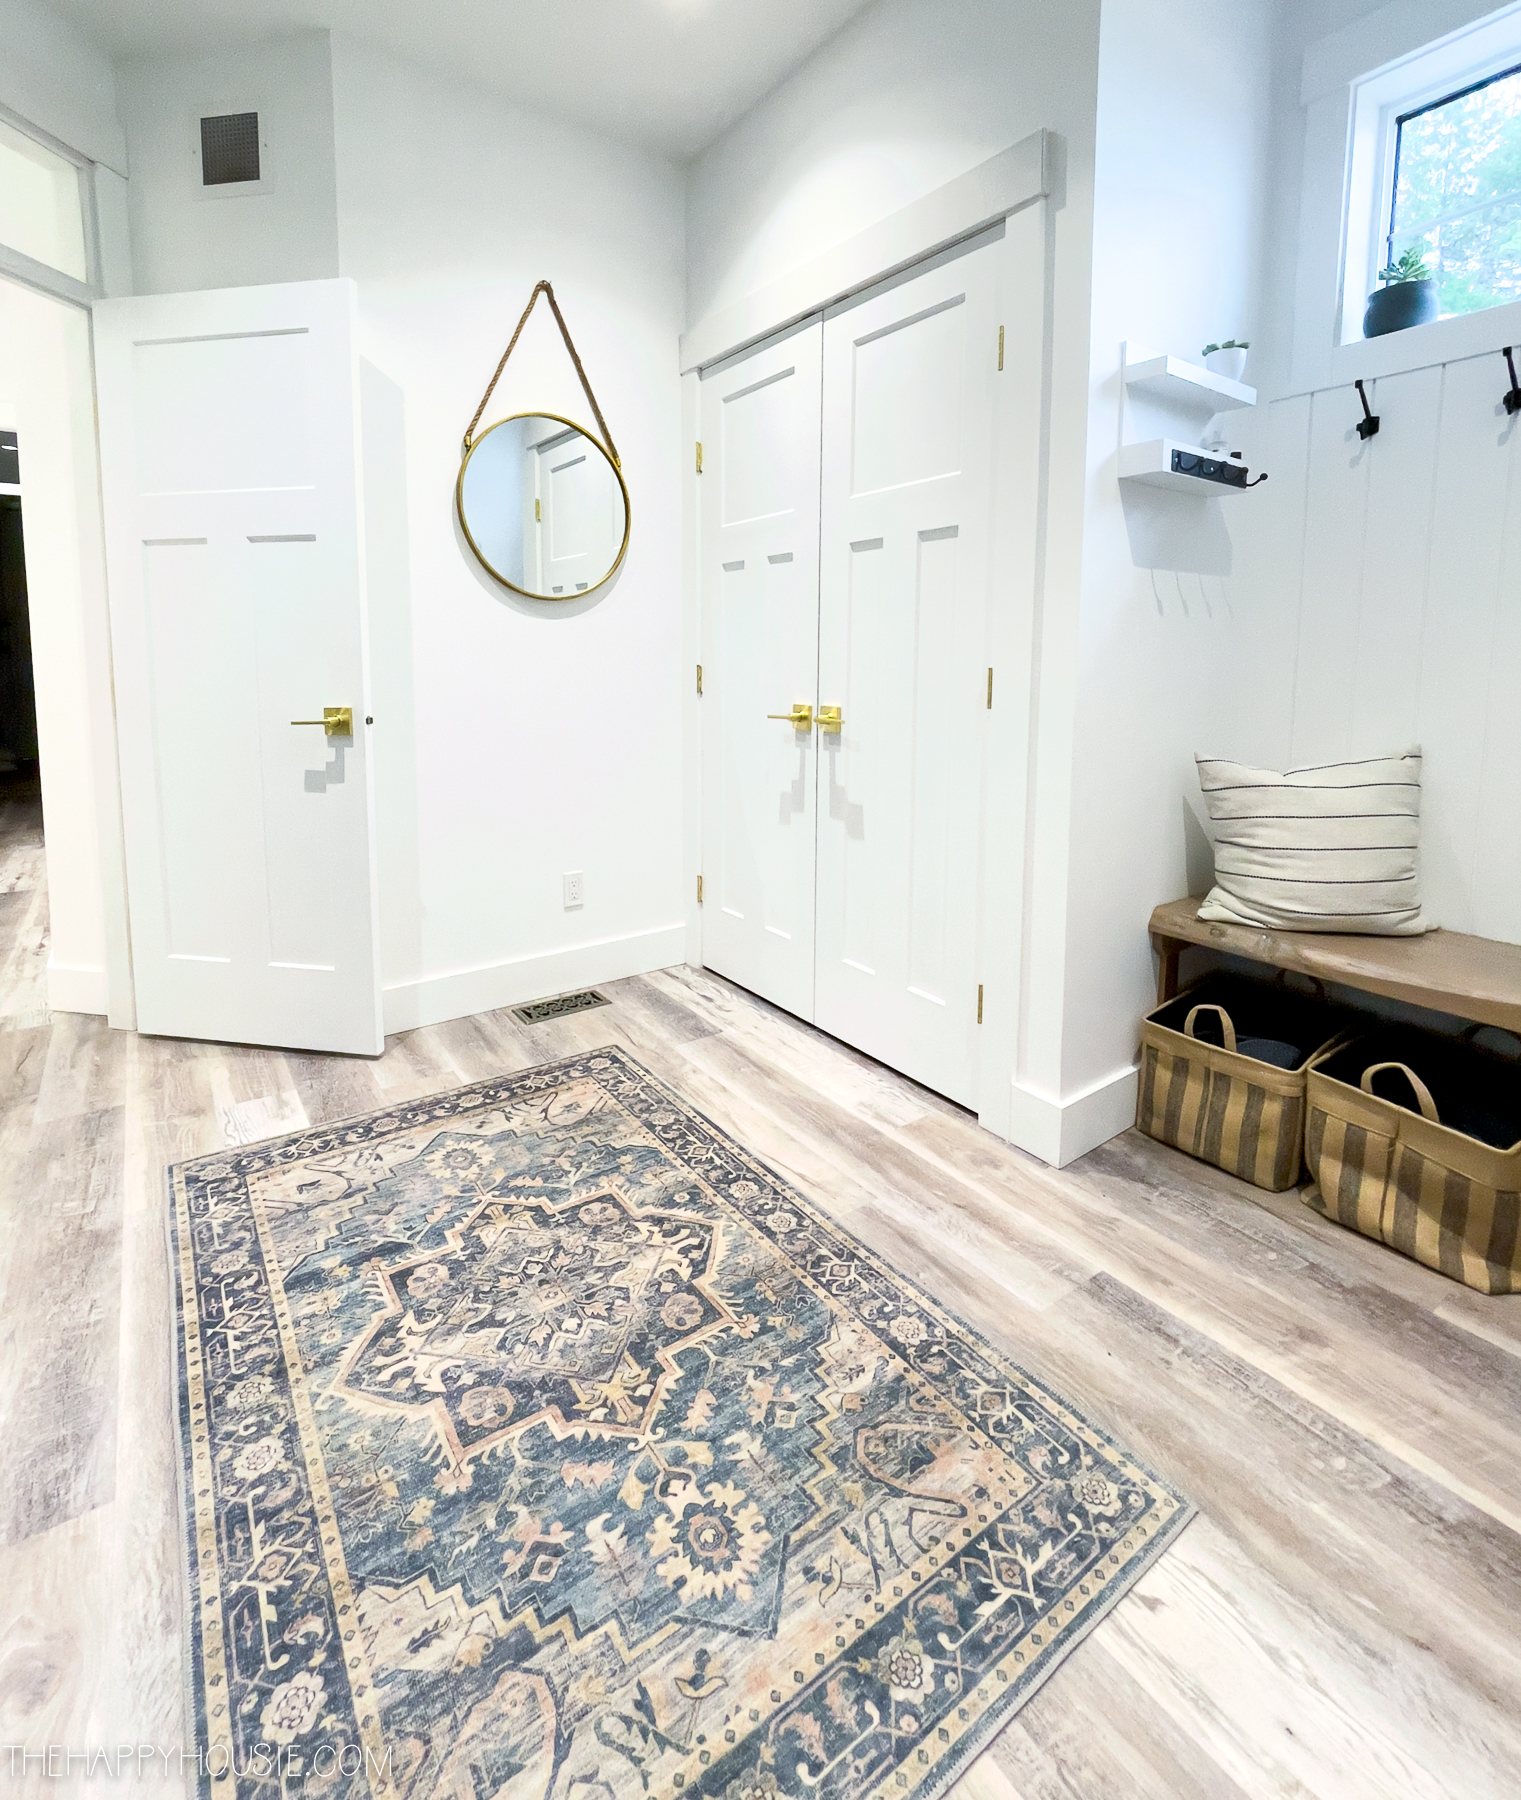 The entryway with a small area rug by the door.